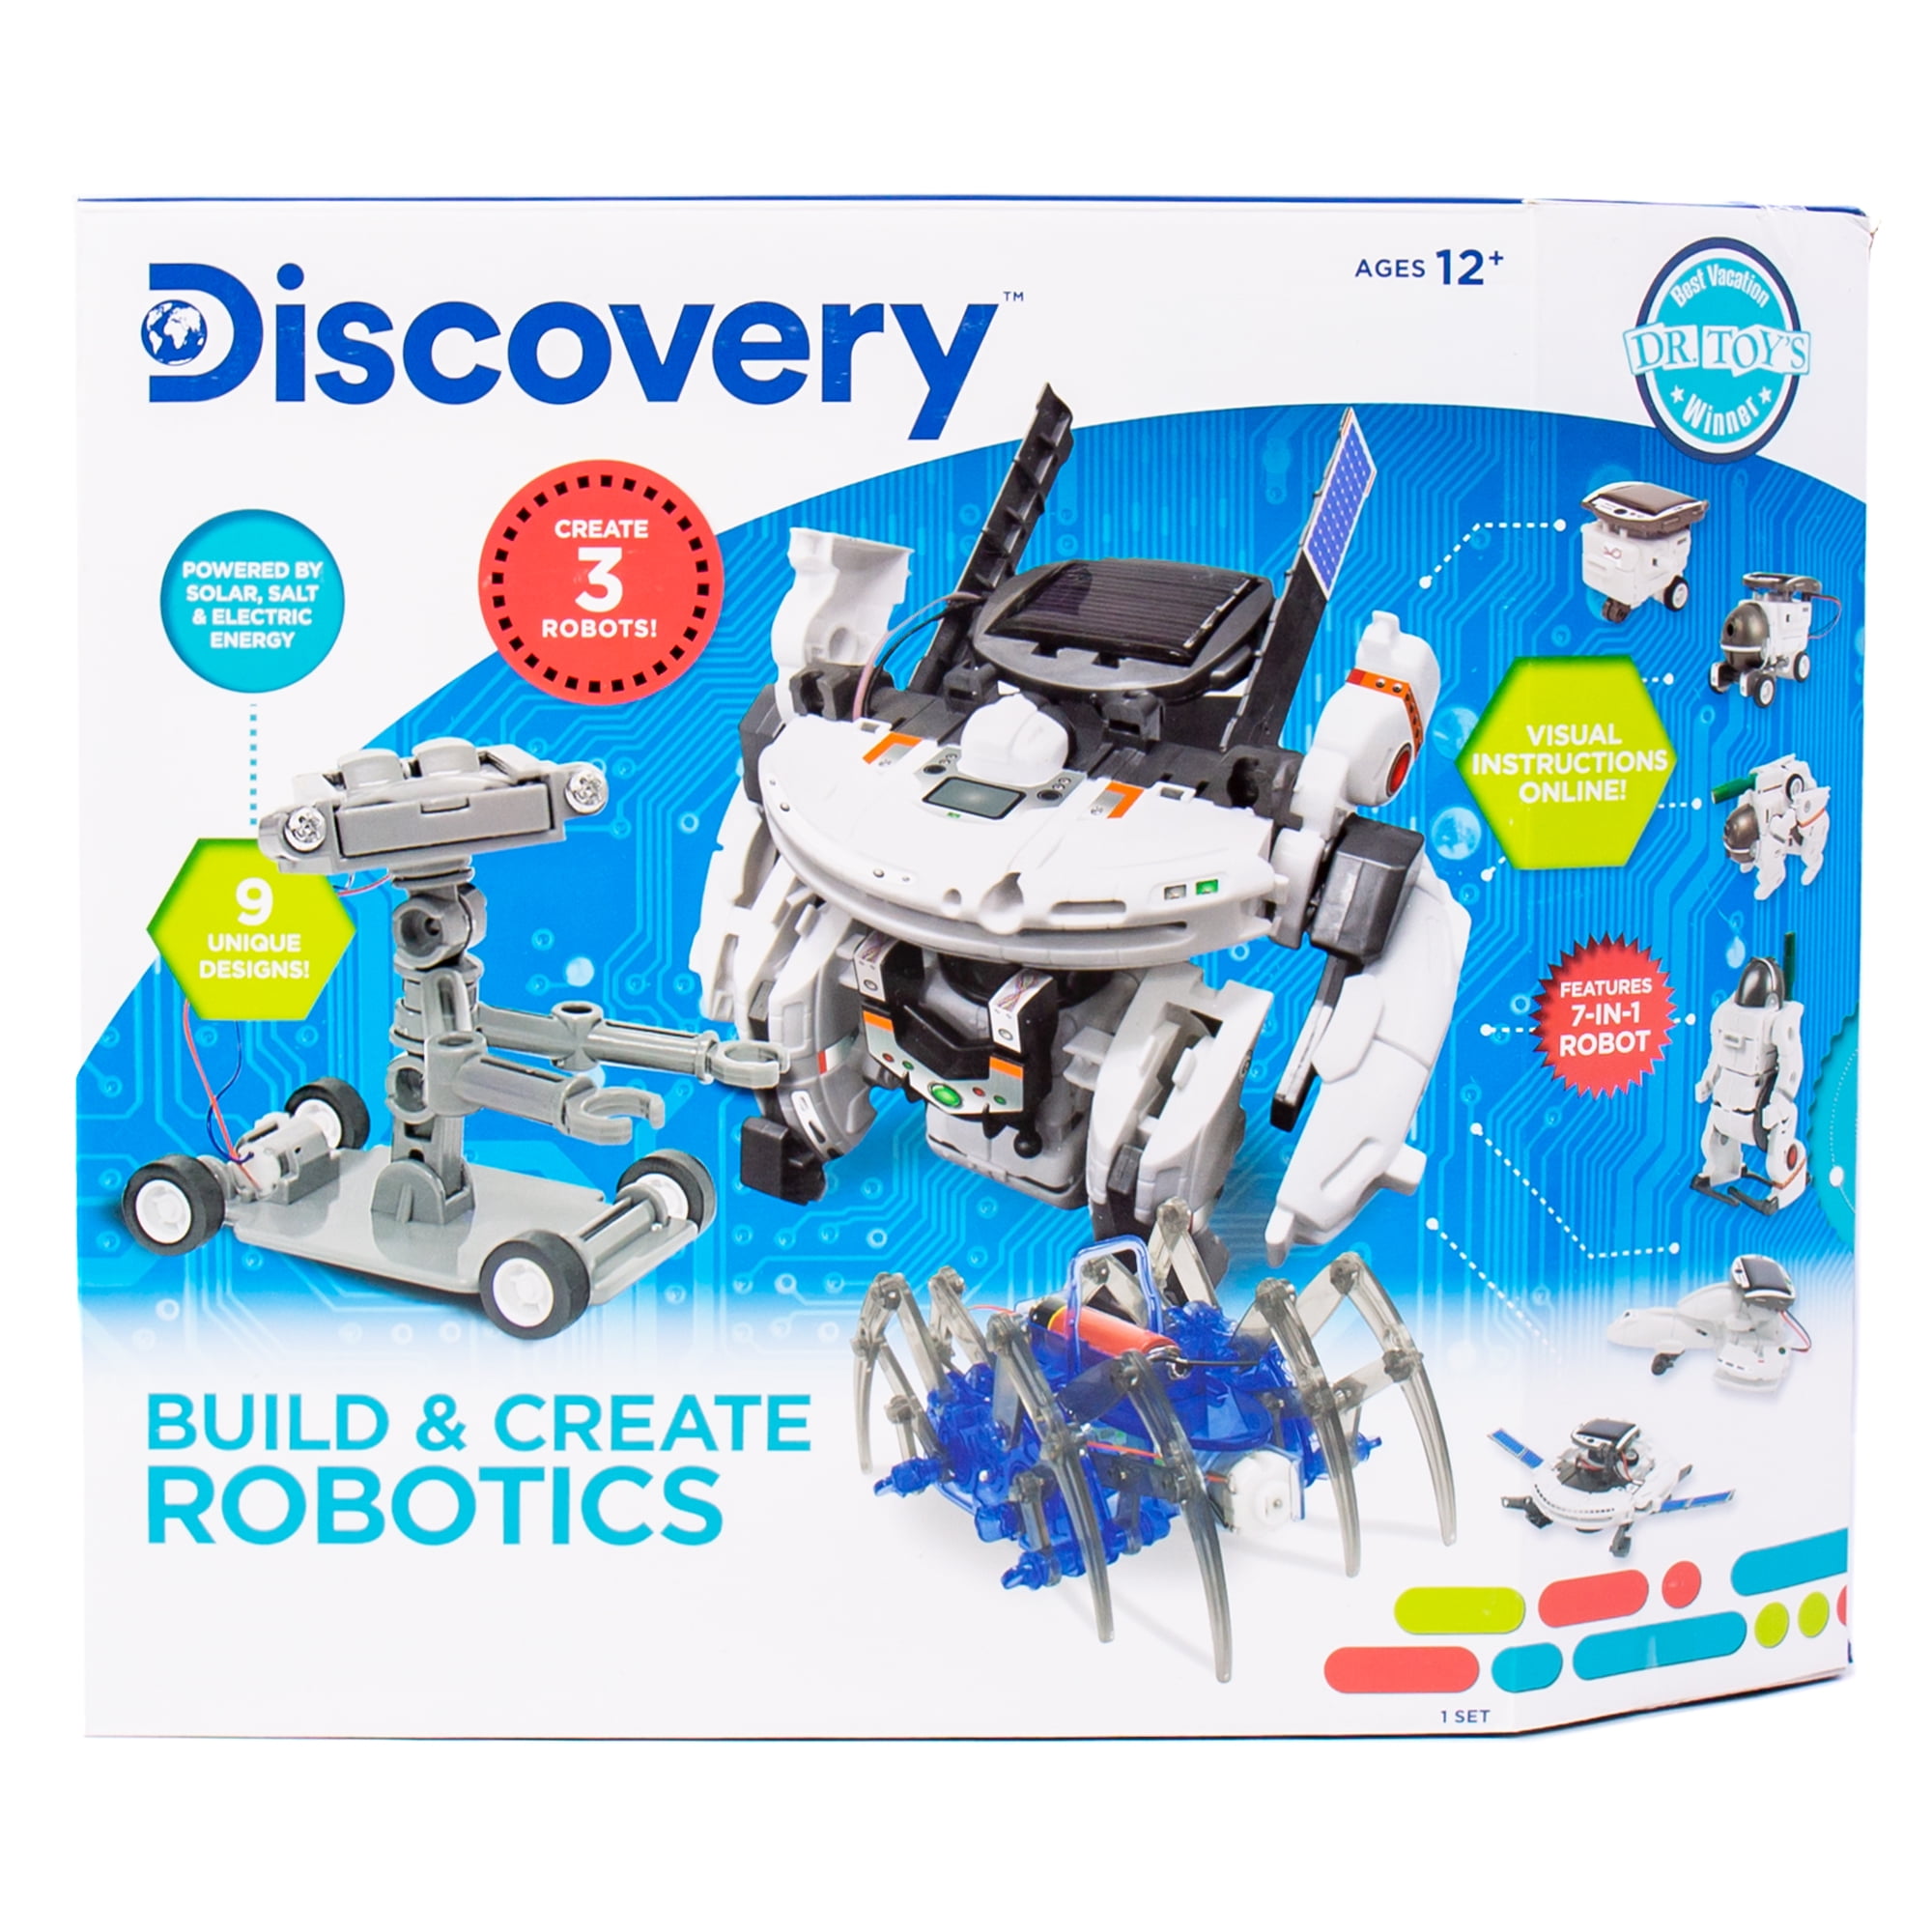 Salt & Electric Energ Details about   Discovery Kids Build And Create Robotics Powered By Solar 